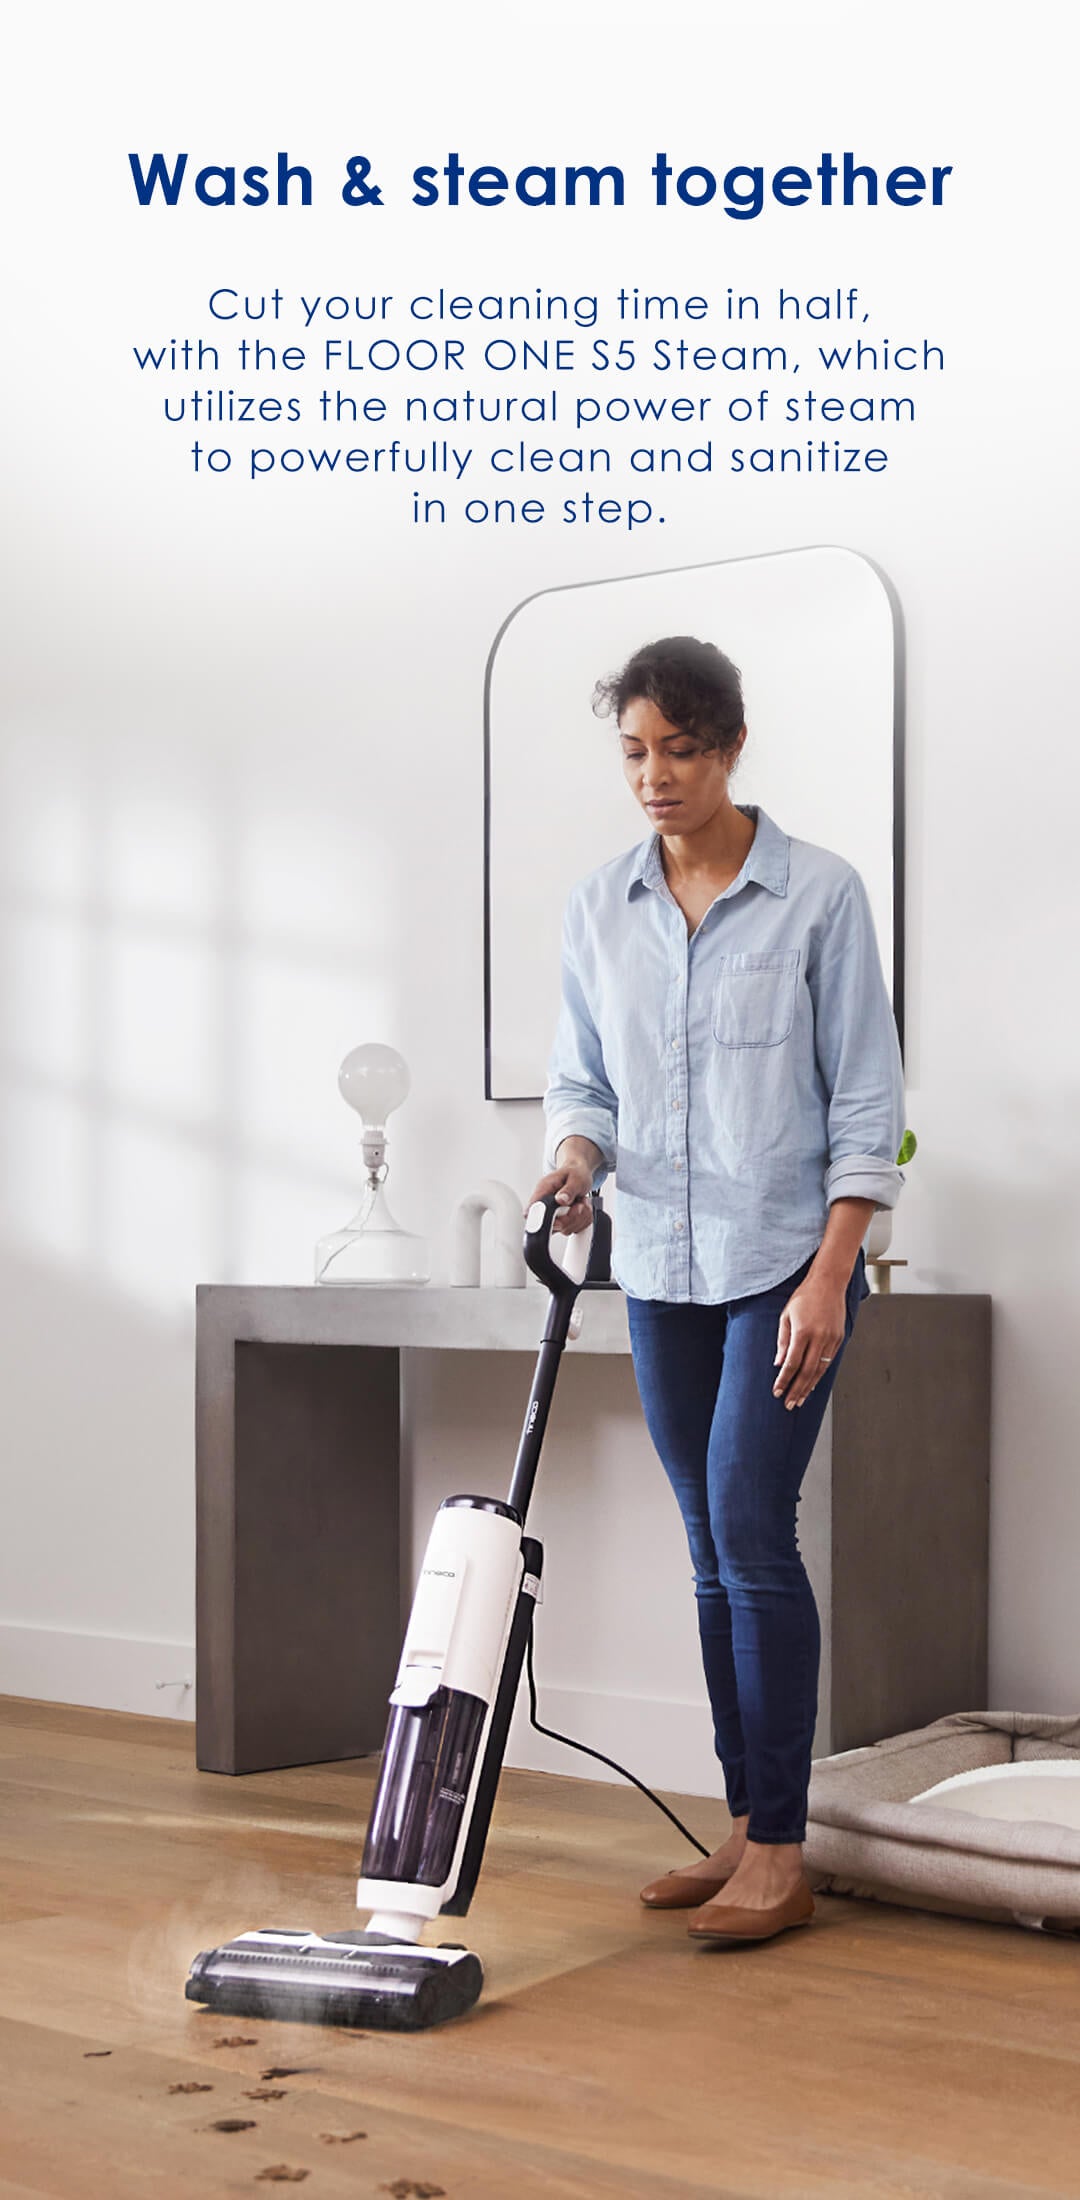 Tineco Floor One S5 Steam Cleaner Wet Dry Vacuum All-in-one (SW100400US)  for sale online